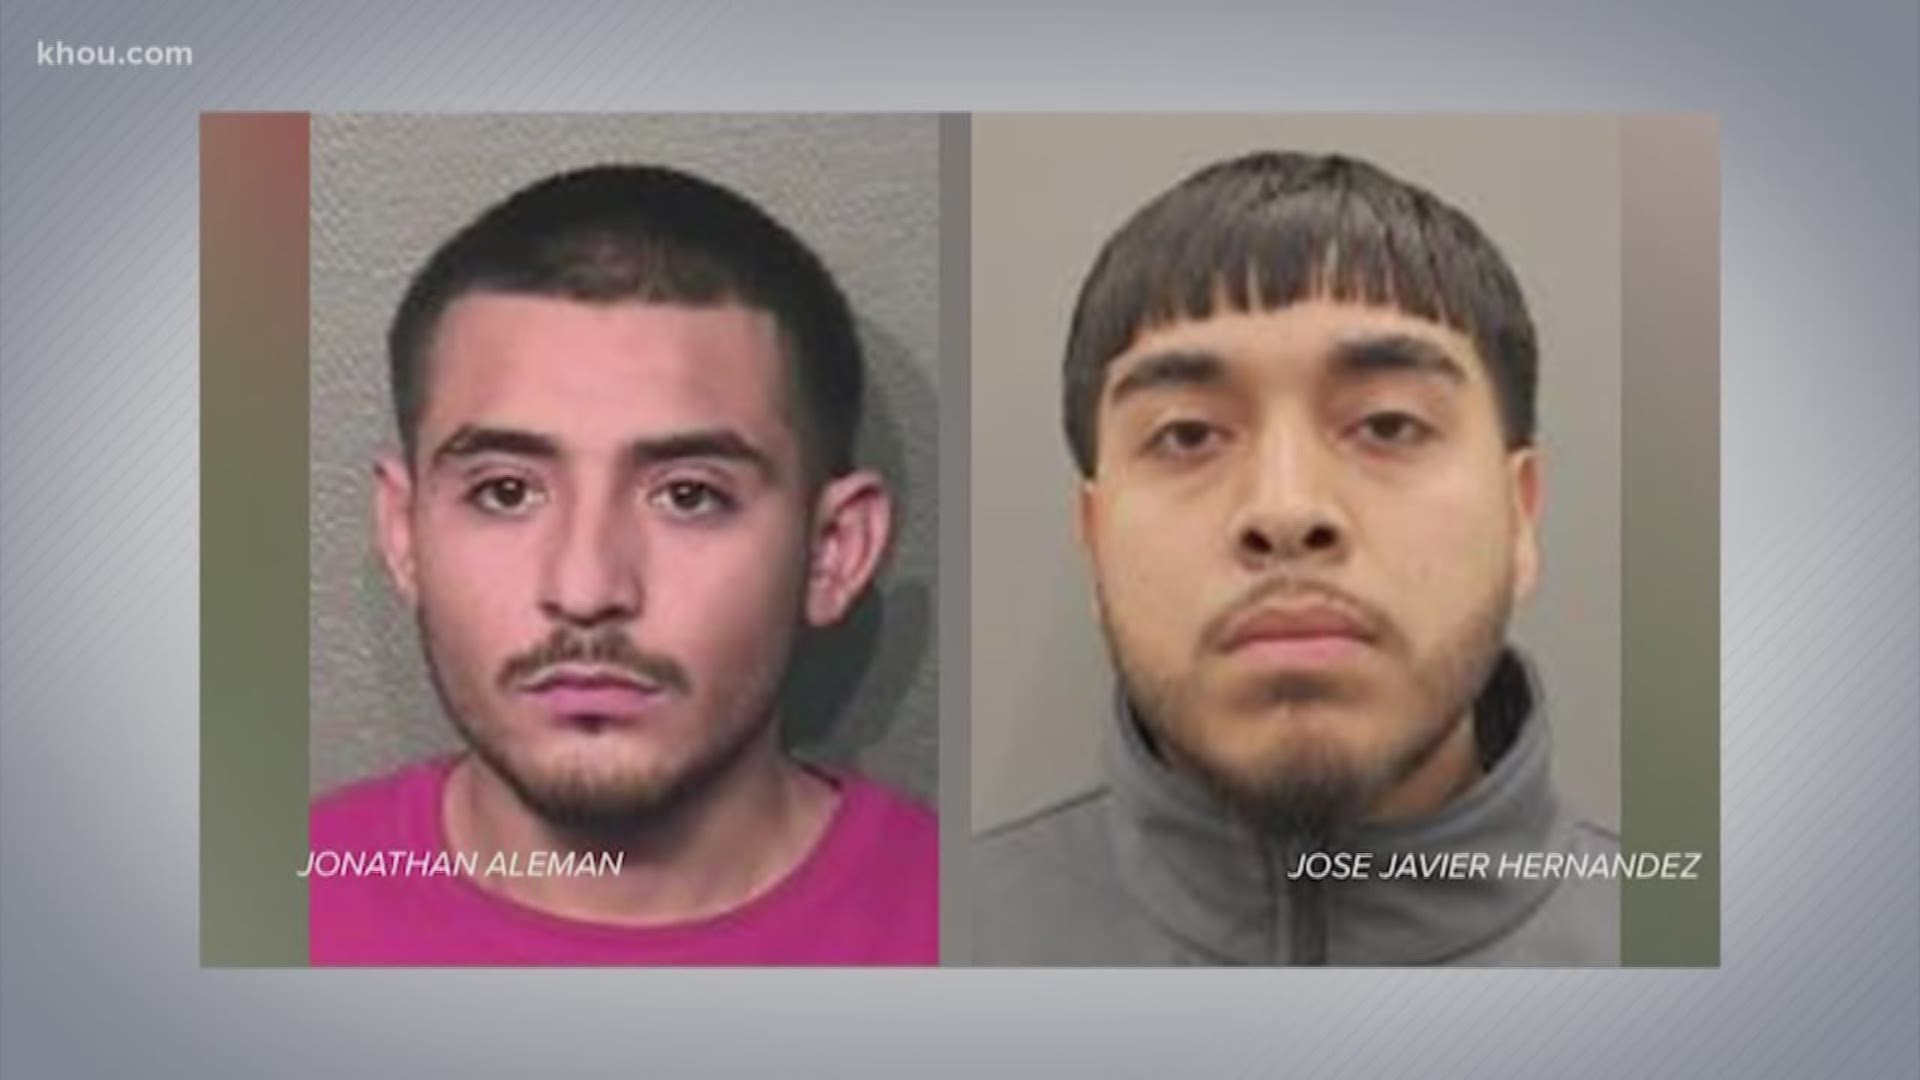 Houston police have arrested at least two suspects in connection to last year's rush-hour shooting that killed two people on I-10.